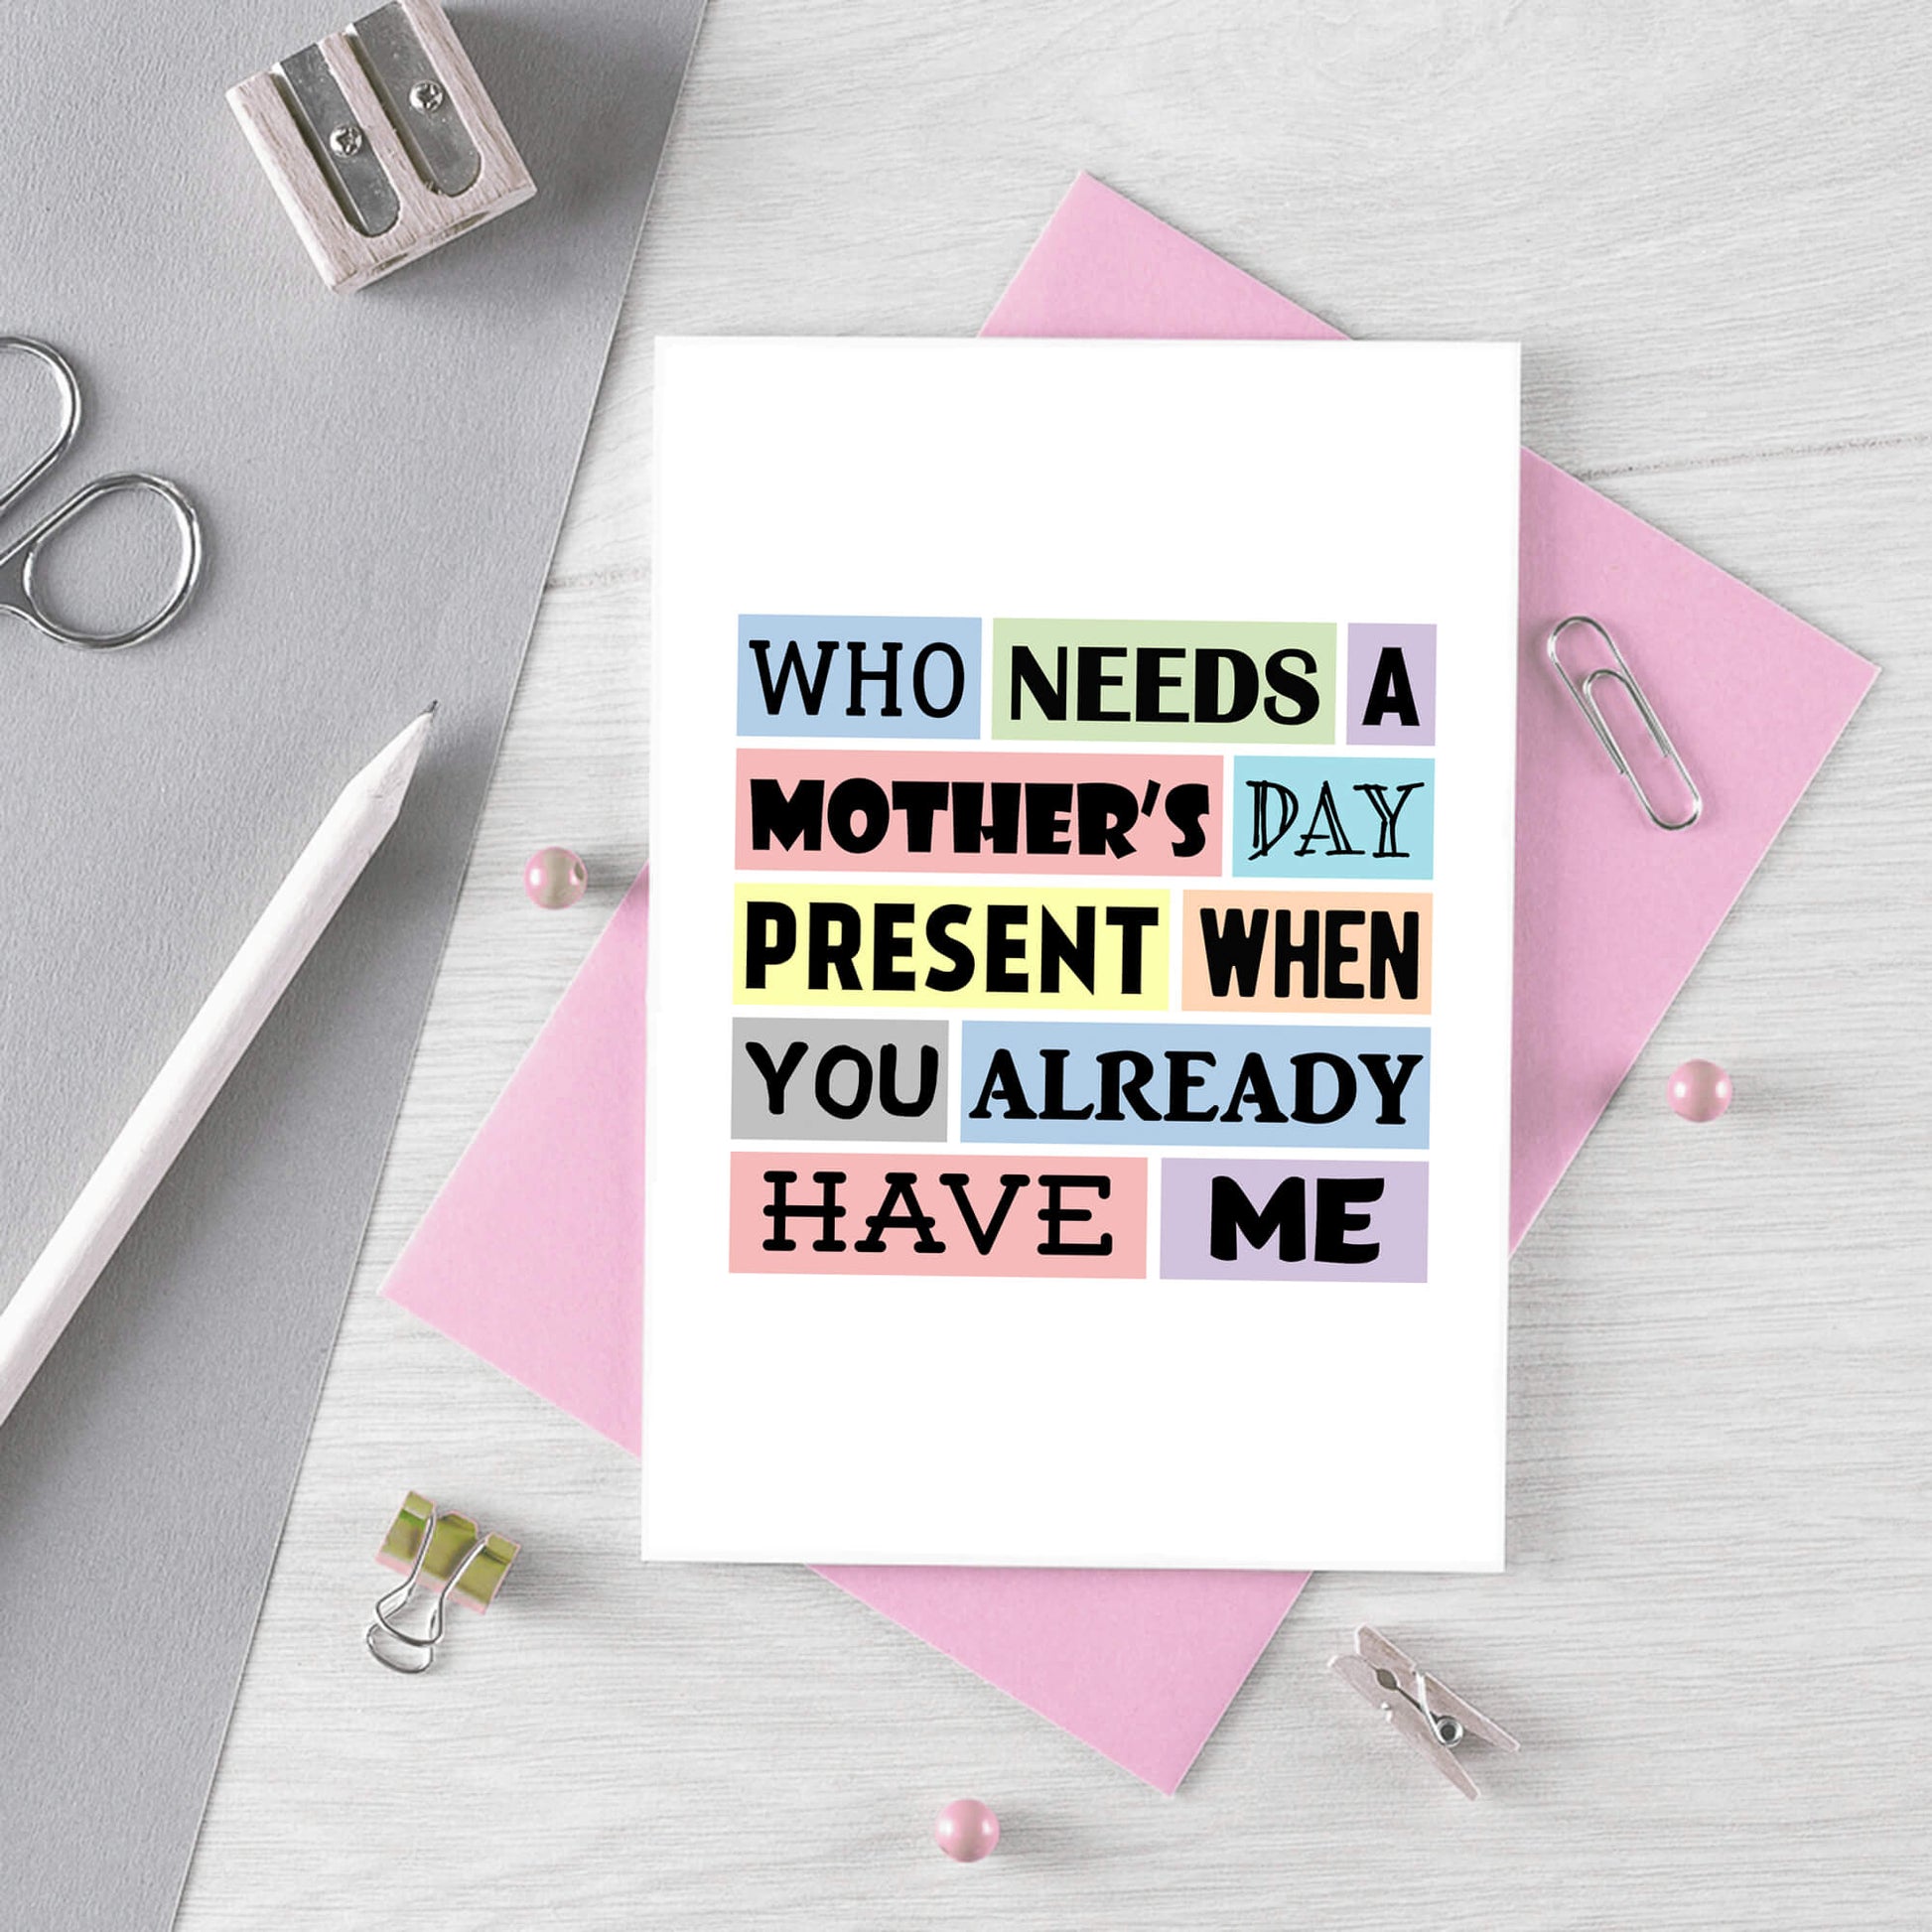 Funny Mother's Day Card by SixElevenCreations. Reads Who needs a Mother's Day present when you already have me. Product Code SEM0003A6